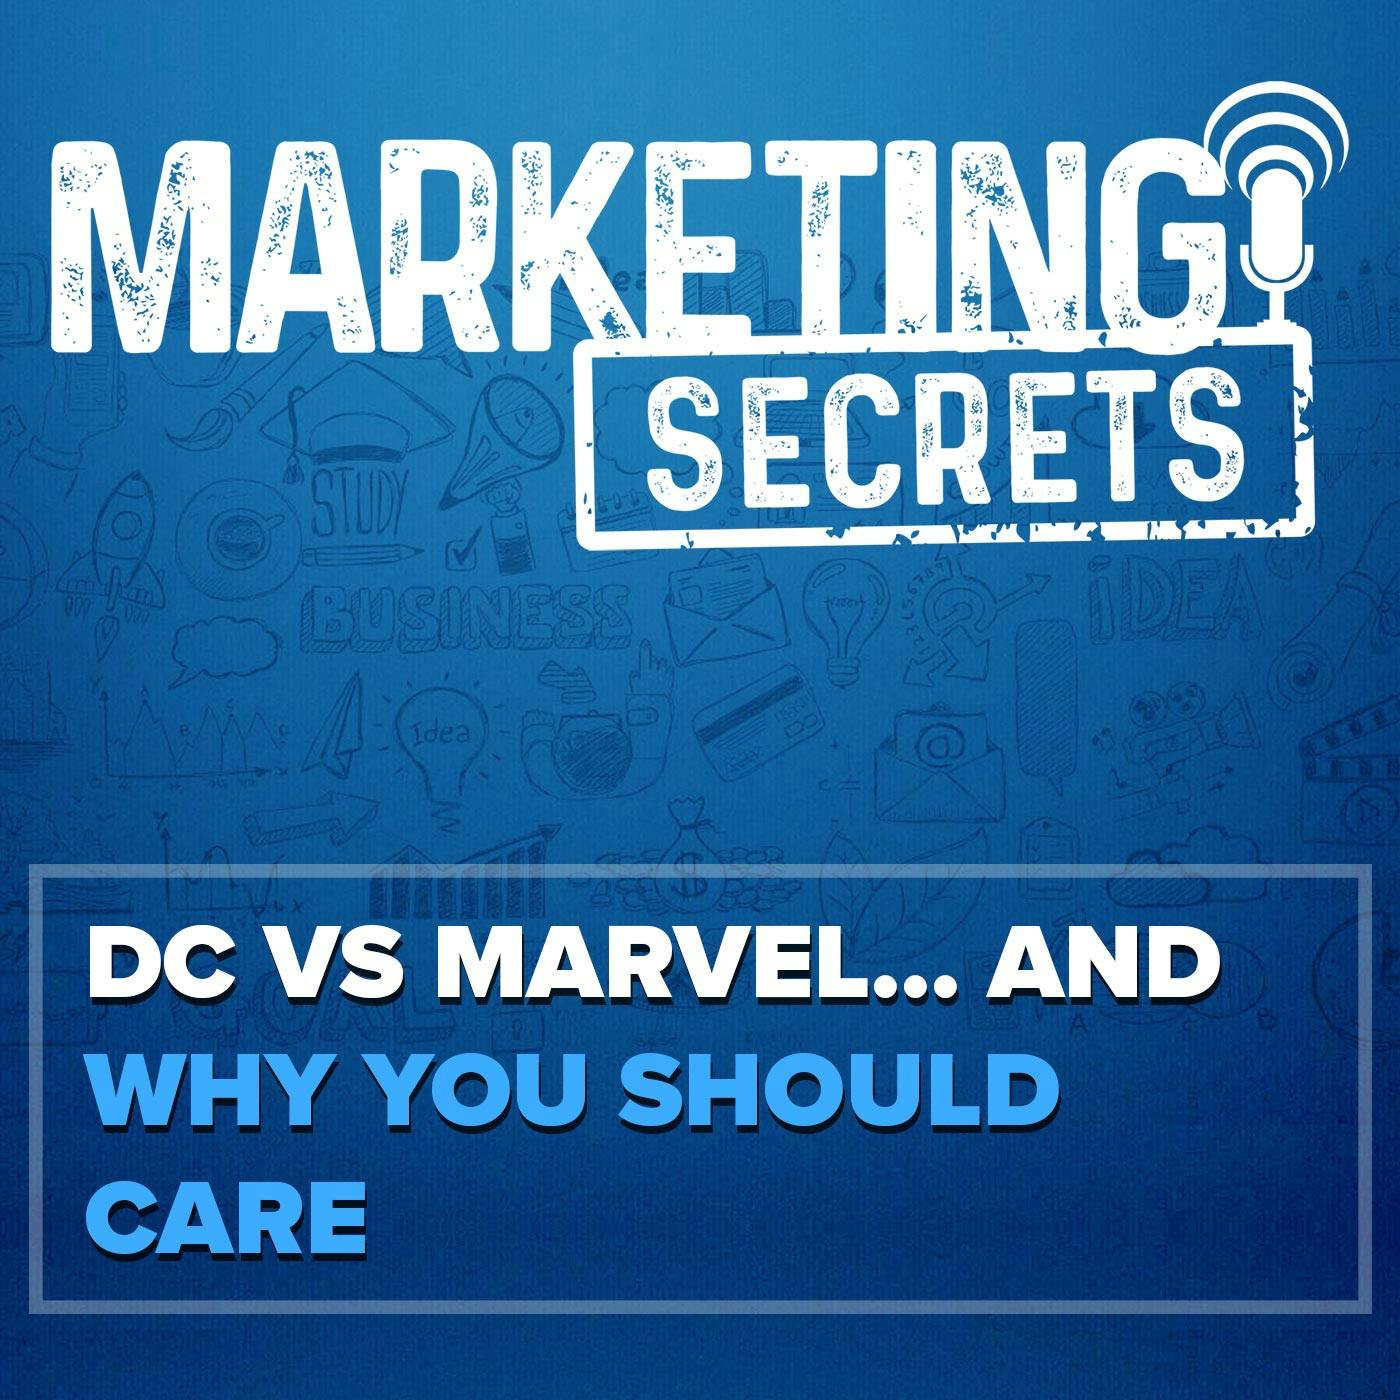 DC vs Marvel... And Why You Should Care